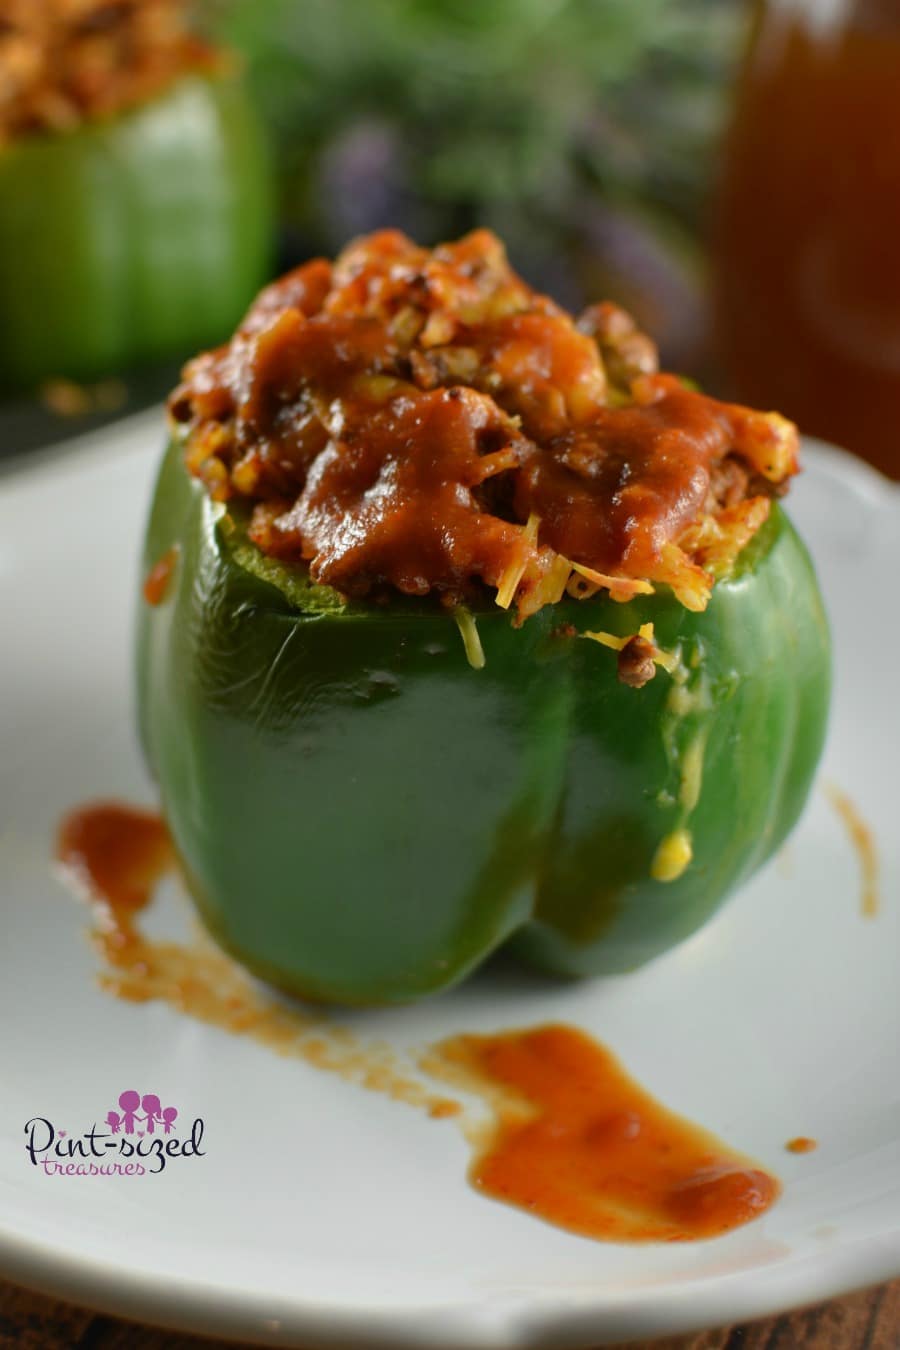 Gorgeous green peppers are loaded with a seasoned beef, tomato sauce and rice mixture.